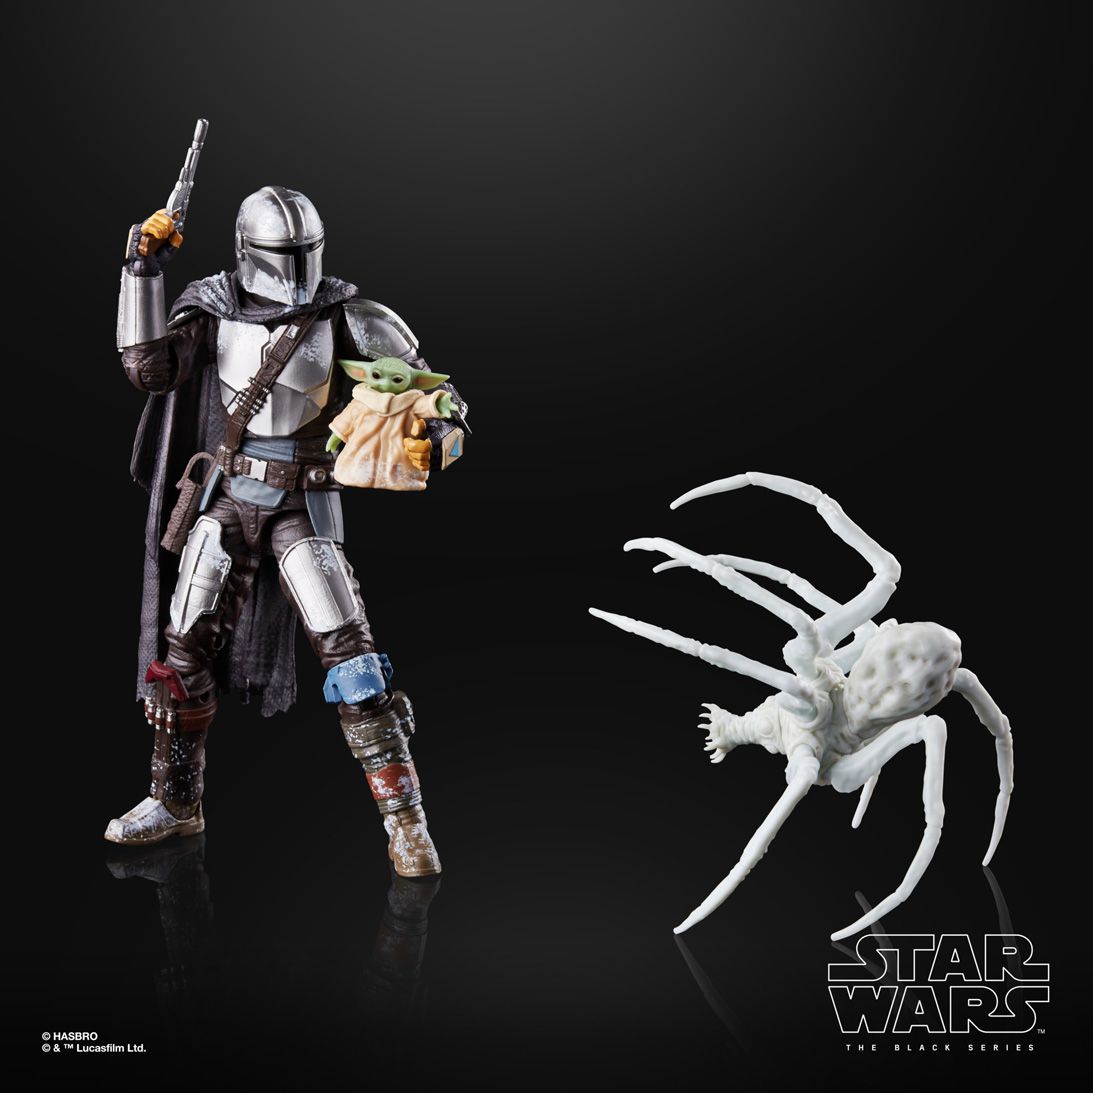 The Mandalorian S2 4 New Star Wars Black Series Figures Revealed [EXCLUSIVE]